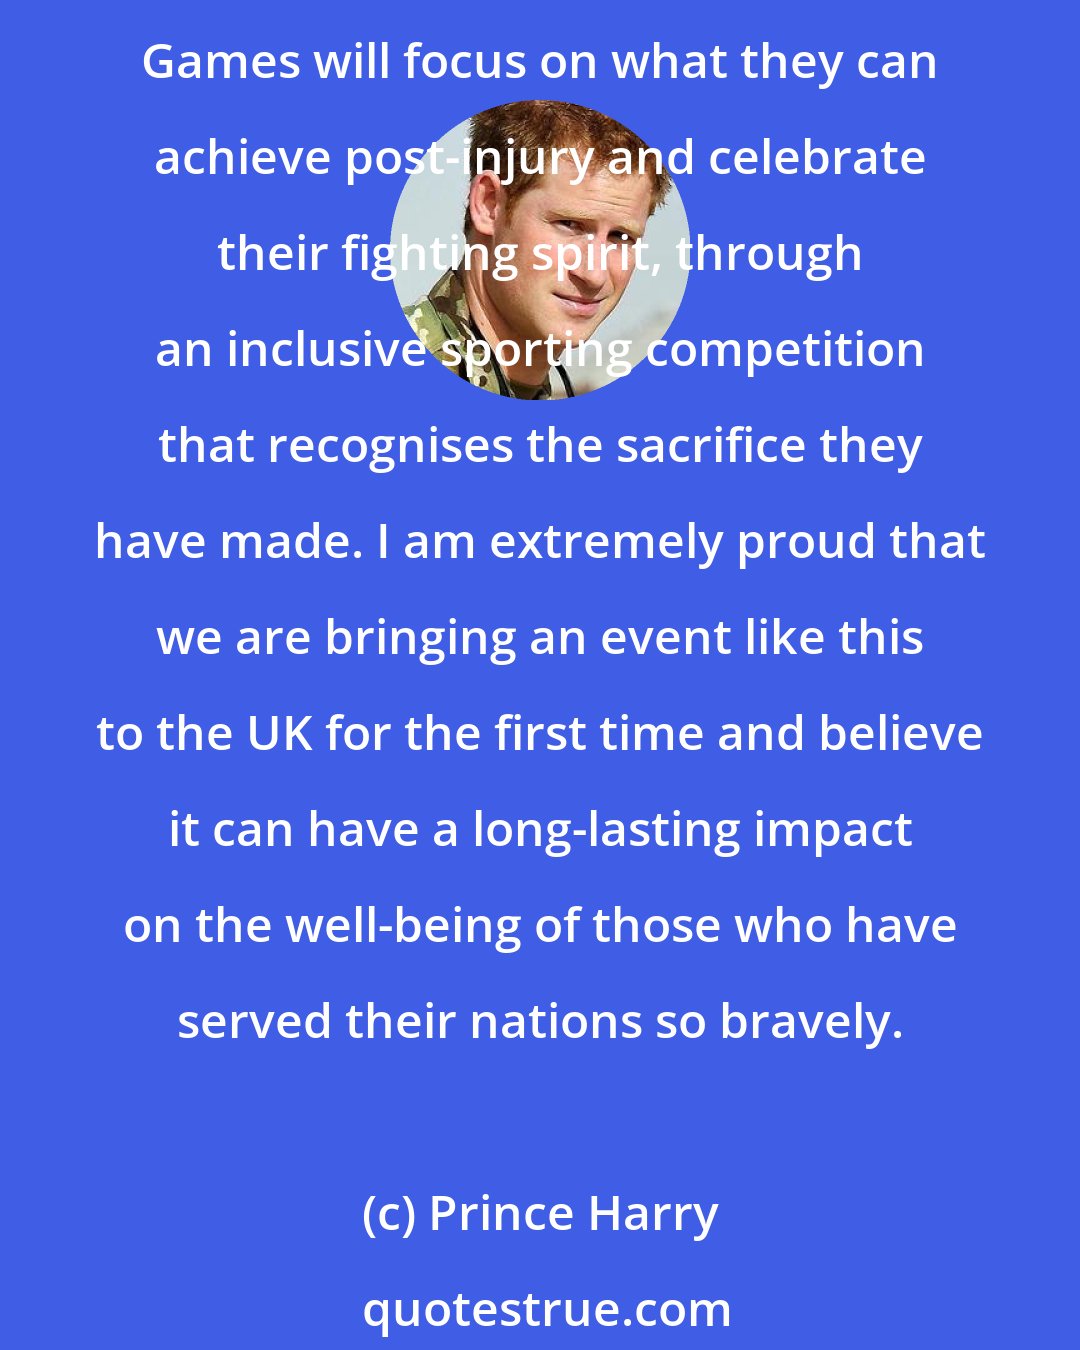 Prince Harry: I have witnessed first-hand how the power of sport can positively impact the lives of wounded, injured and sick servicemen and women in their journey of recovery. The Invictus Games will focus on what they can achieve post-injury and celebrate their fighting spirit, through an inclusive sporting competition that recognises the sacrifice they have made. I am extremely proud that we are bringing an event like this to the UK for the first time and believe it can have a long-lasting impact on the well-being of those who have served their nations so bravely.